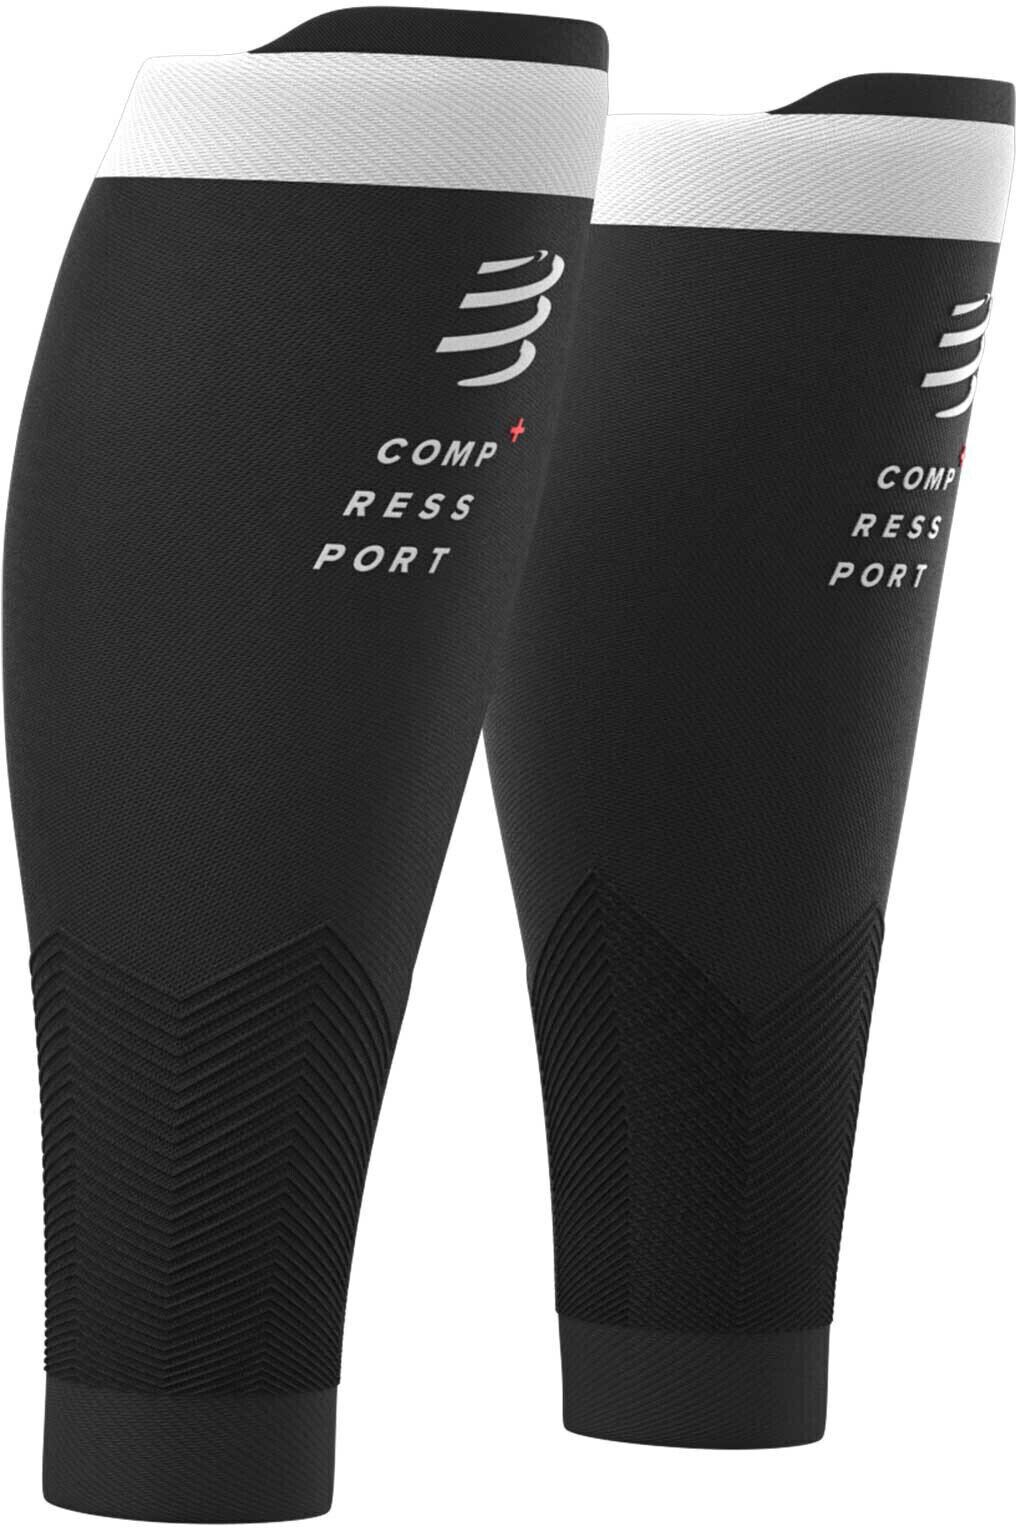 Calf covers for runners Compressport R2v2 Black T3 Calf covers for runners